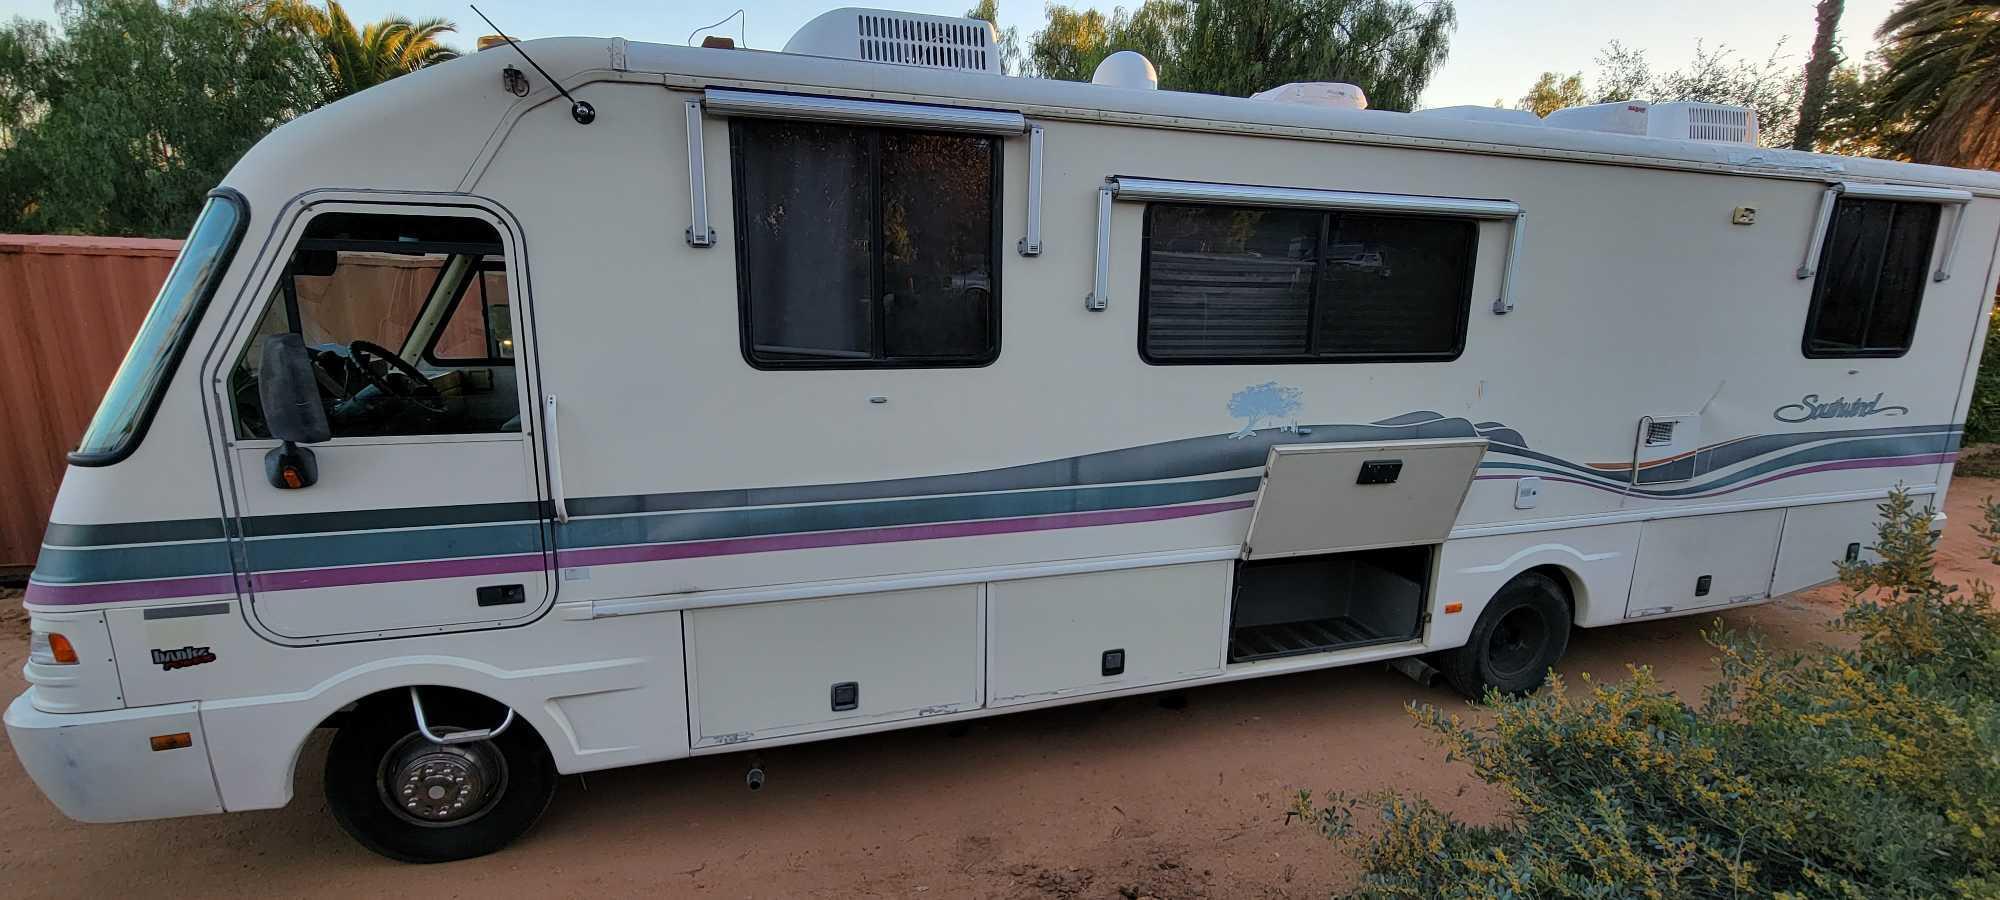 1995 Ford Southwinds 30ft RV 74,162 Miles Nov 2022 stickers